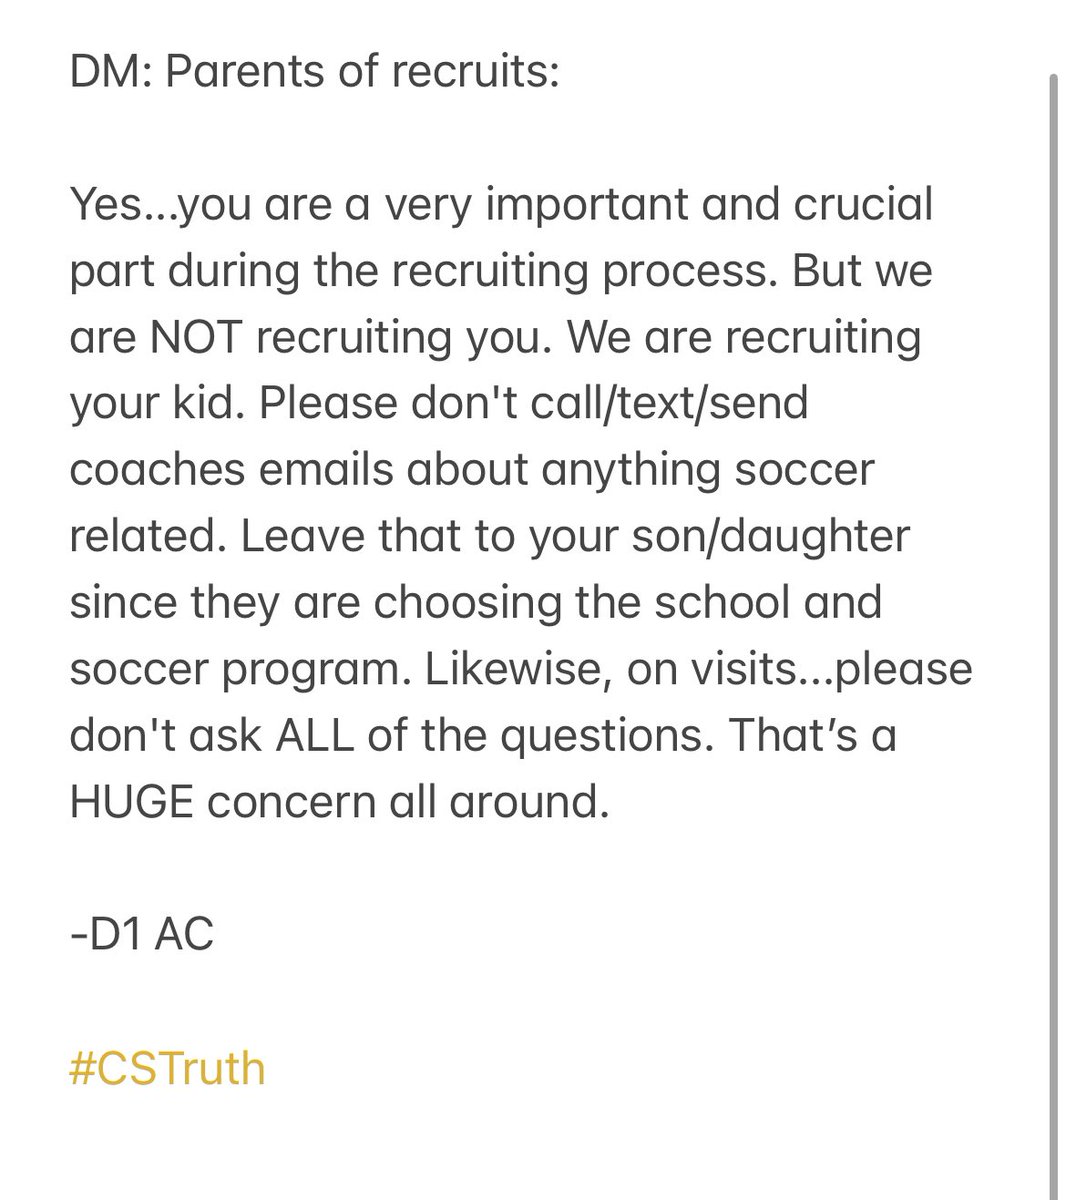 DM: Parents of recruits: Yes...you are a very important and crucial part during the recruiting process. But we are NOT recruiting you. -D1 AC #CSTruth Truth!